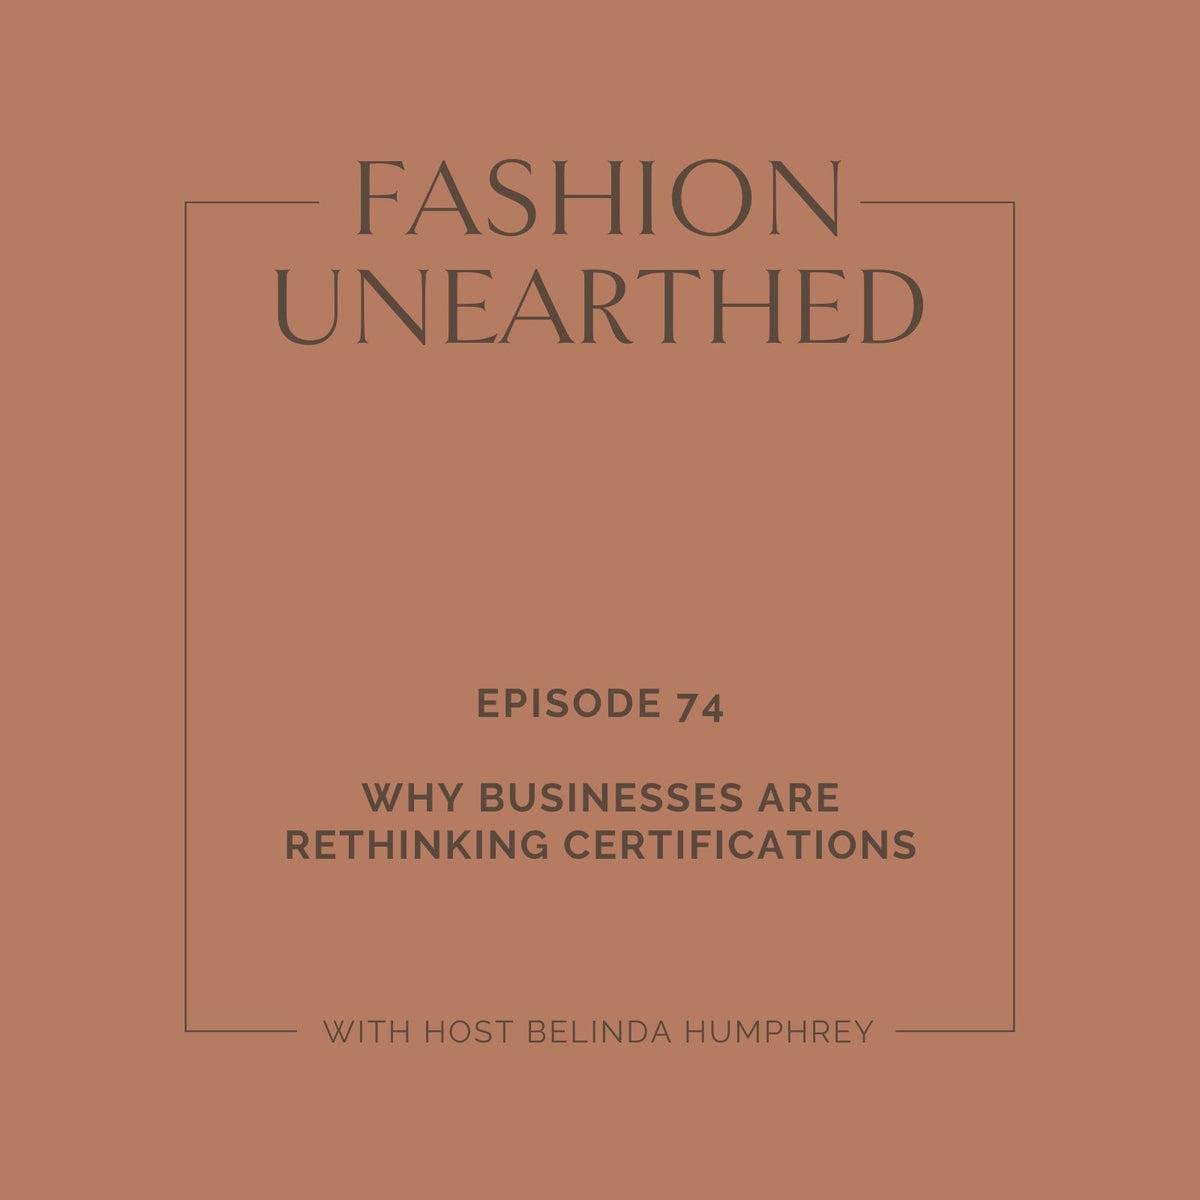 Episode 74: Why businesses are rethinking certifications